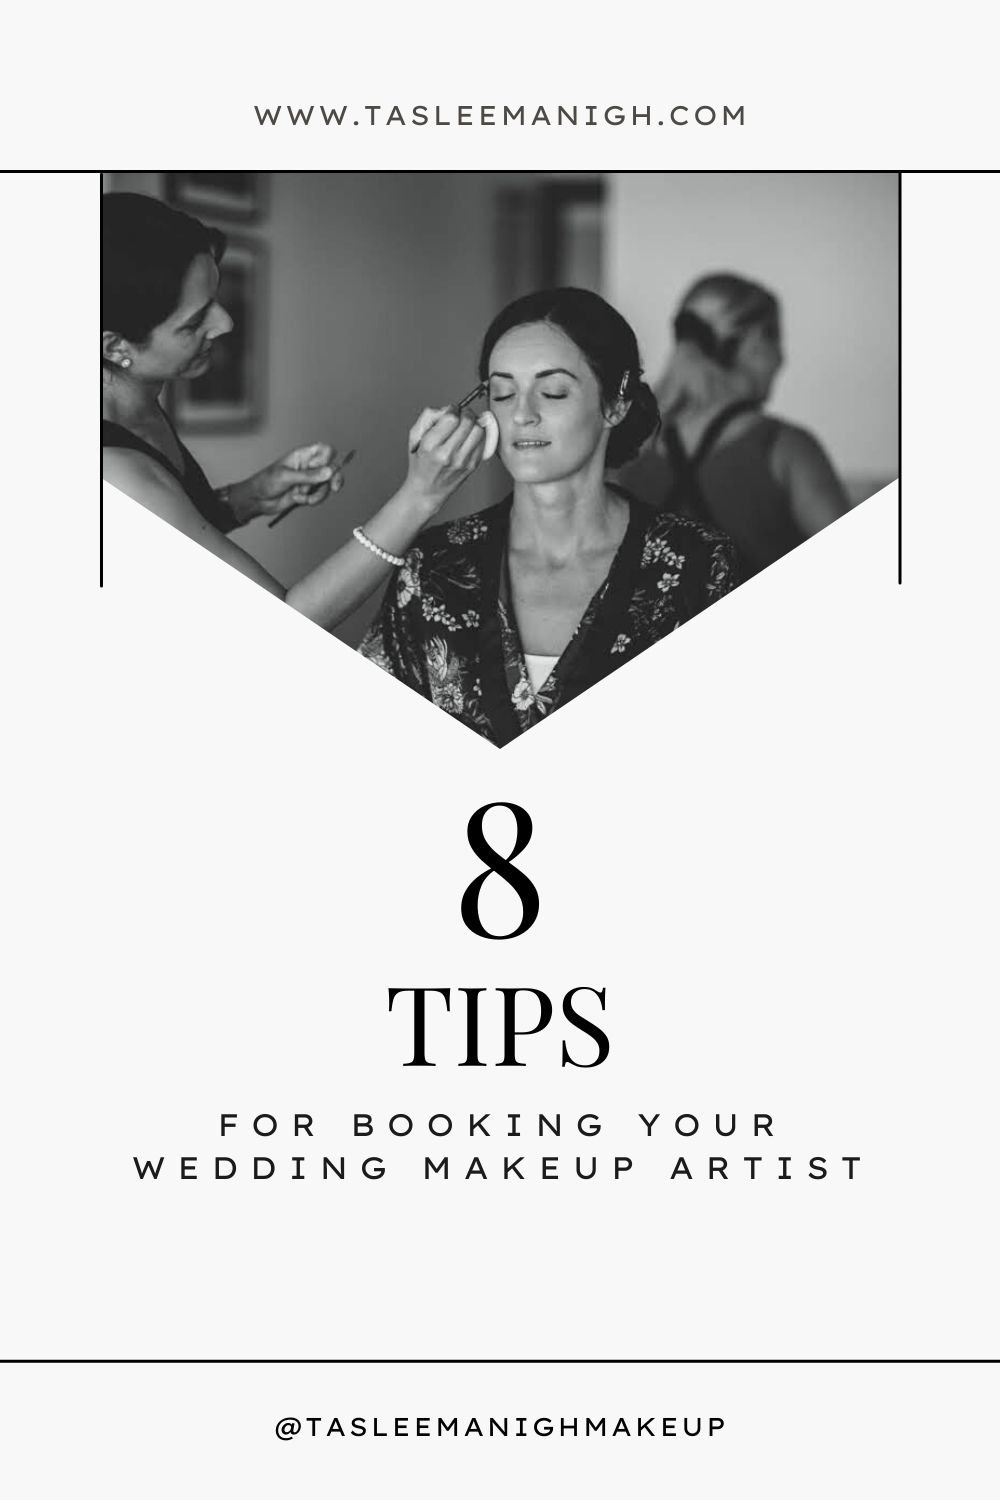 How to Choose the Right Makeup Artist for Your Wedding?